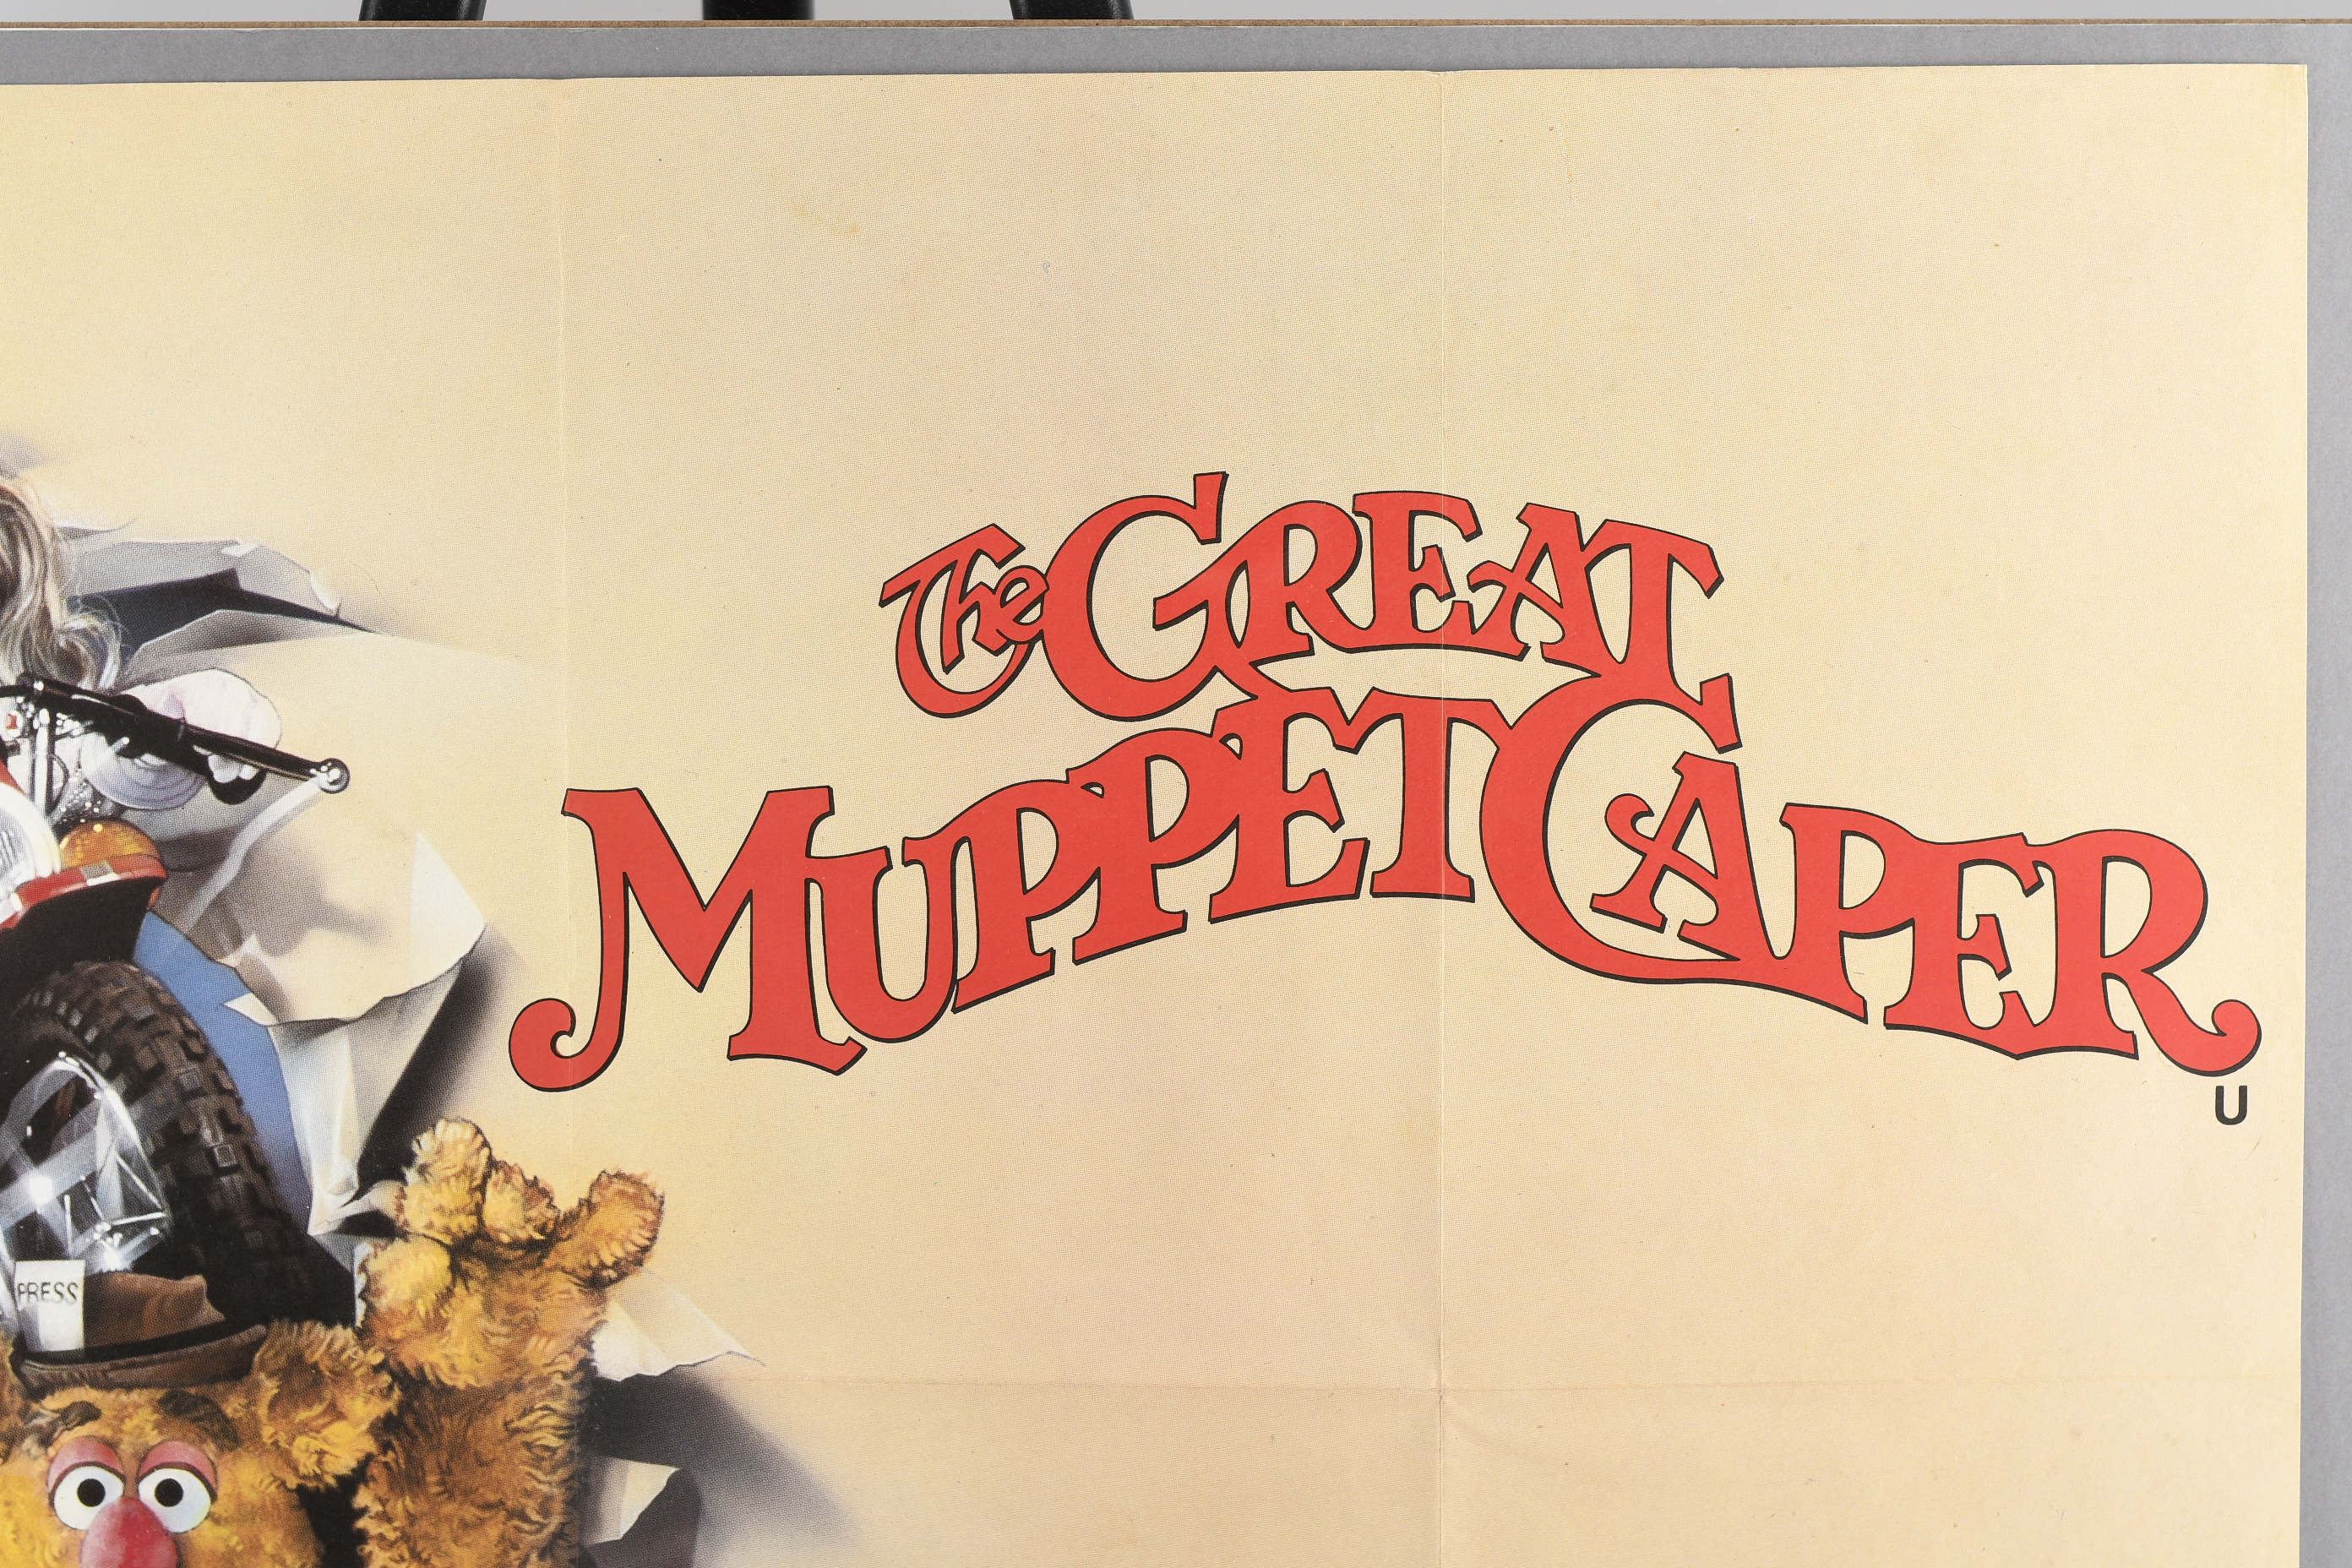 Original 'The Great Muppet Caper' Film Poster - Image 7 of 8